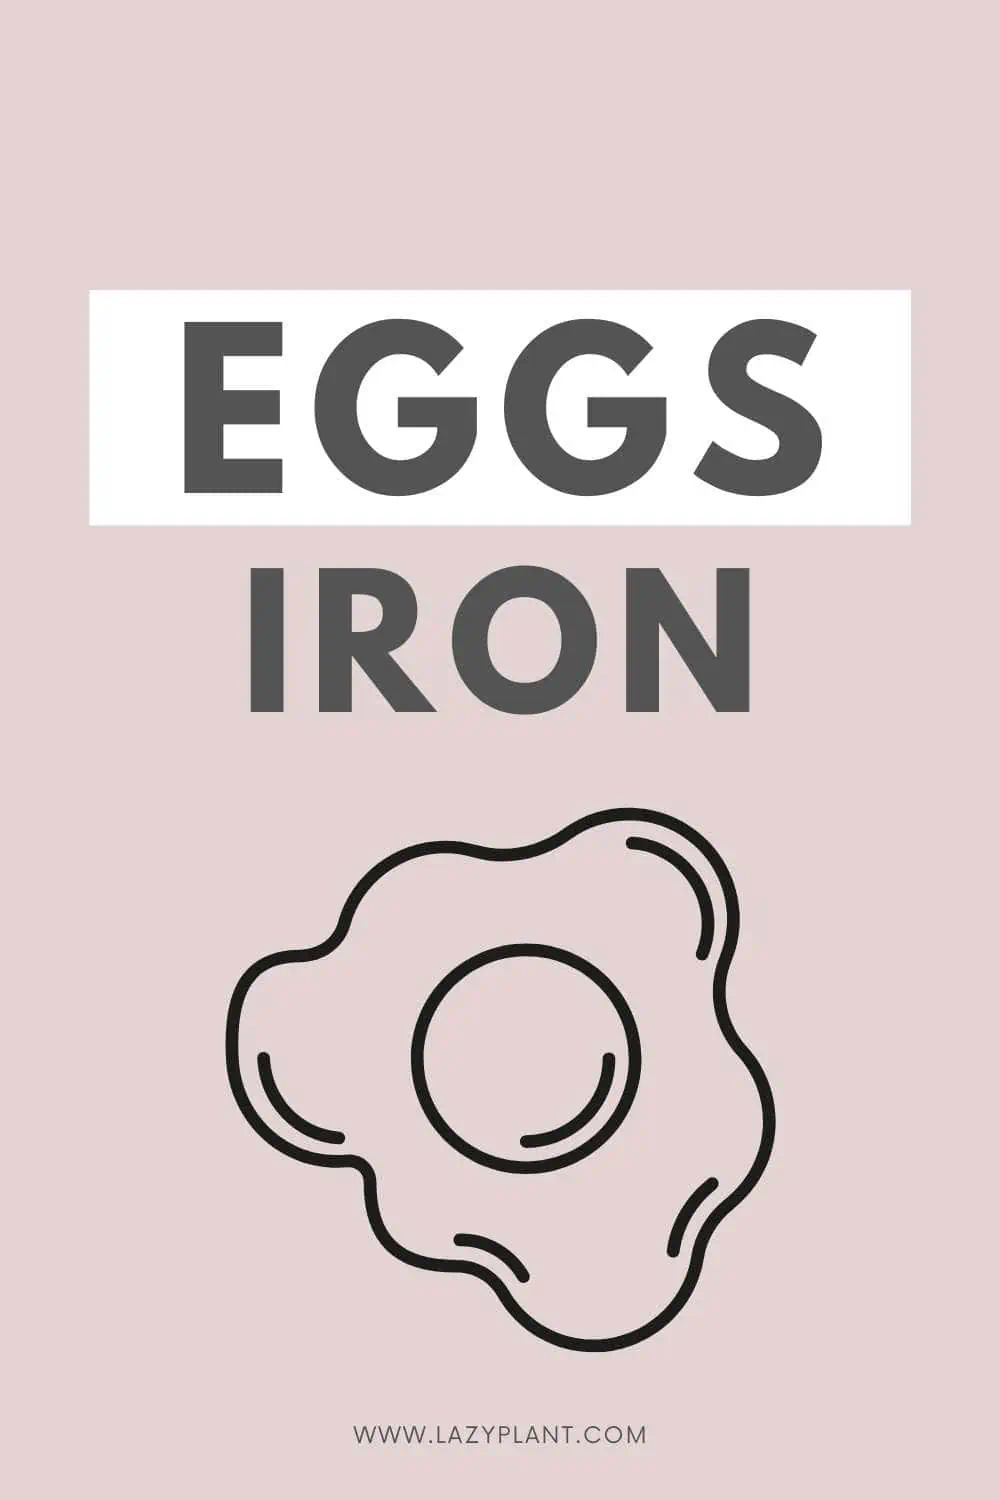 How much Iton is in Eggs?